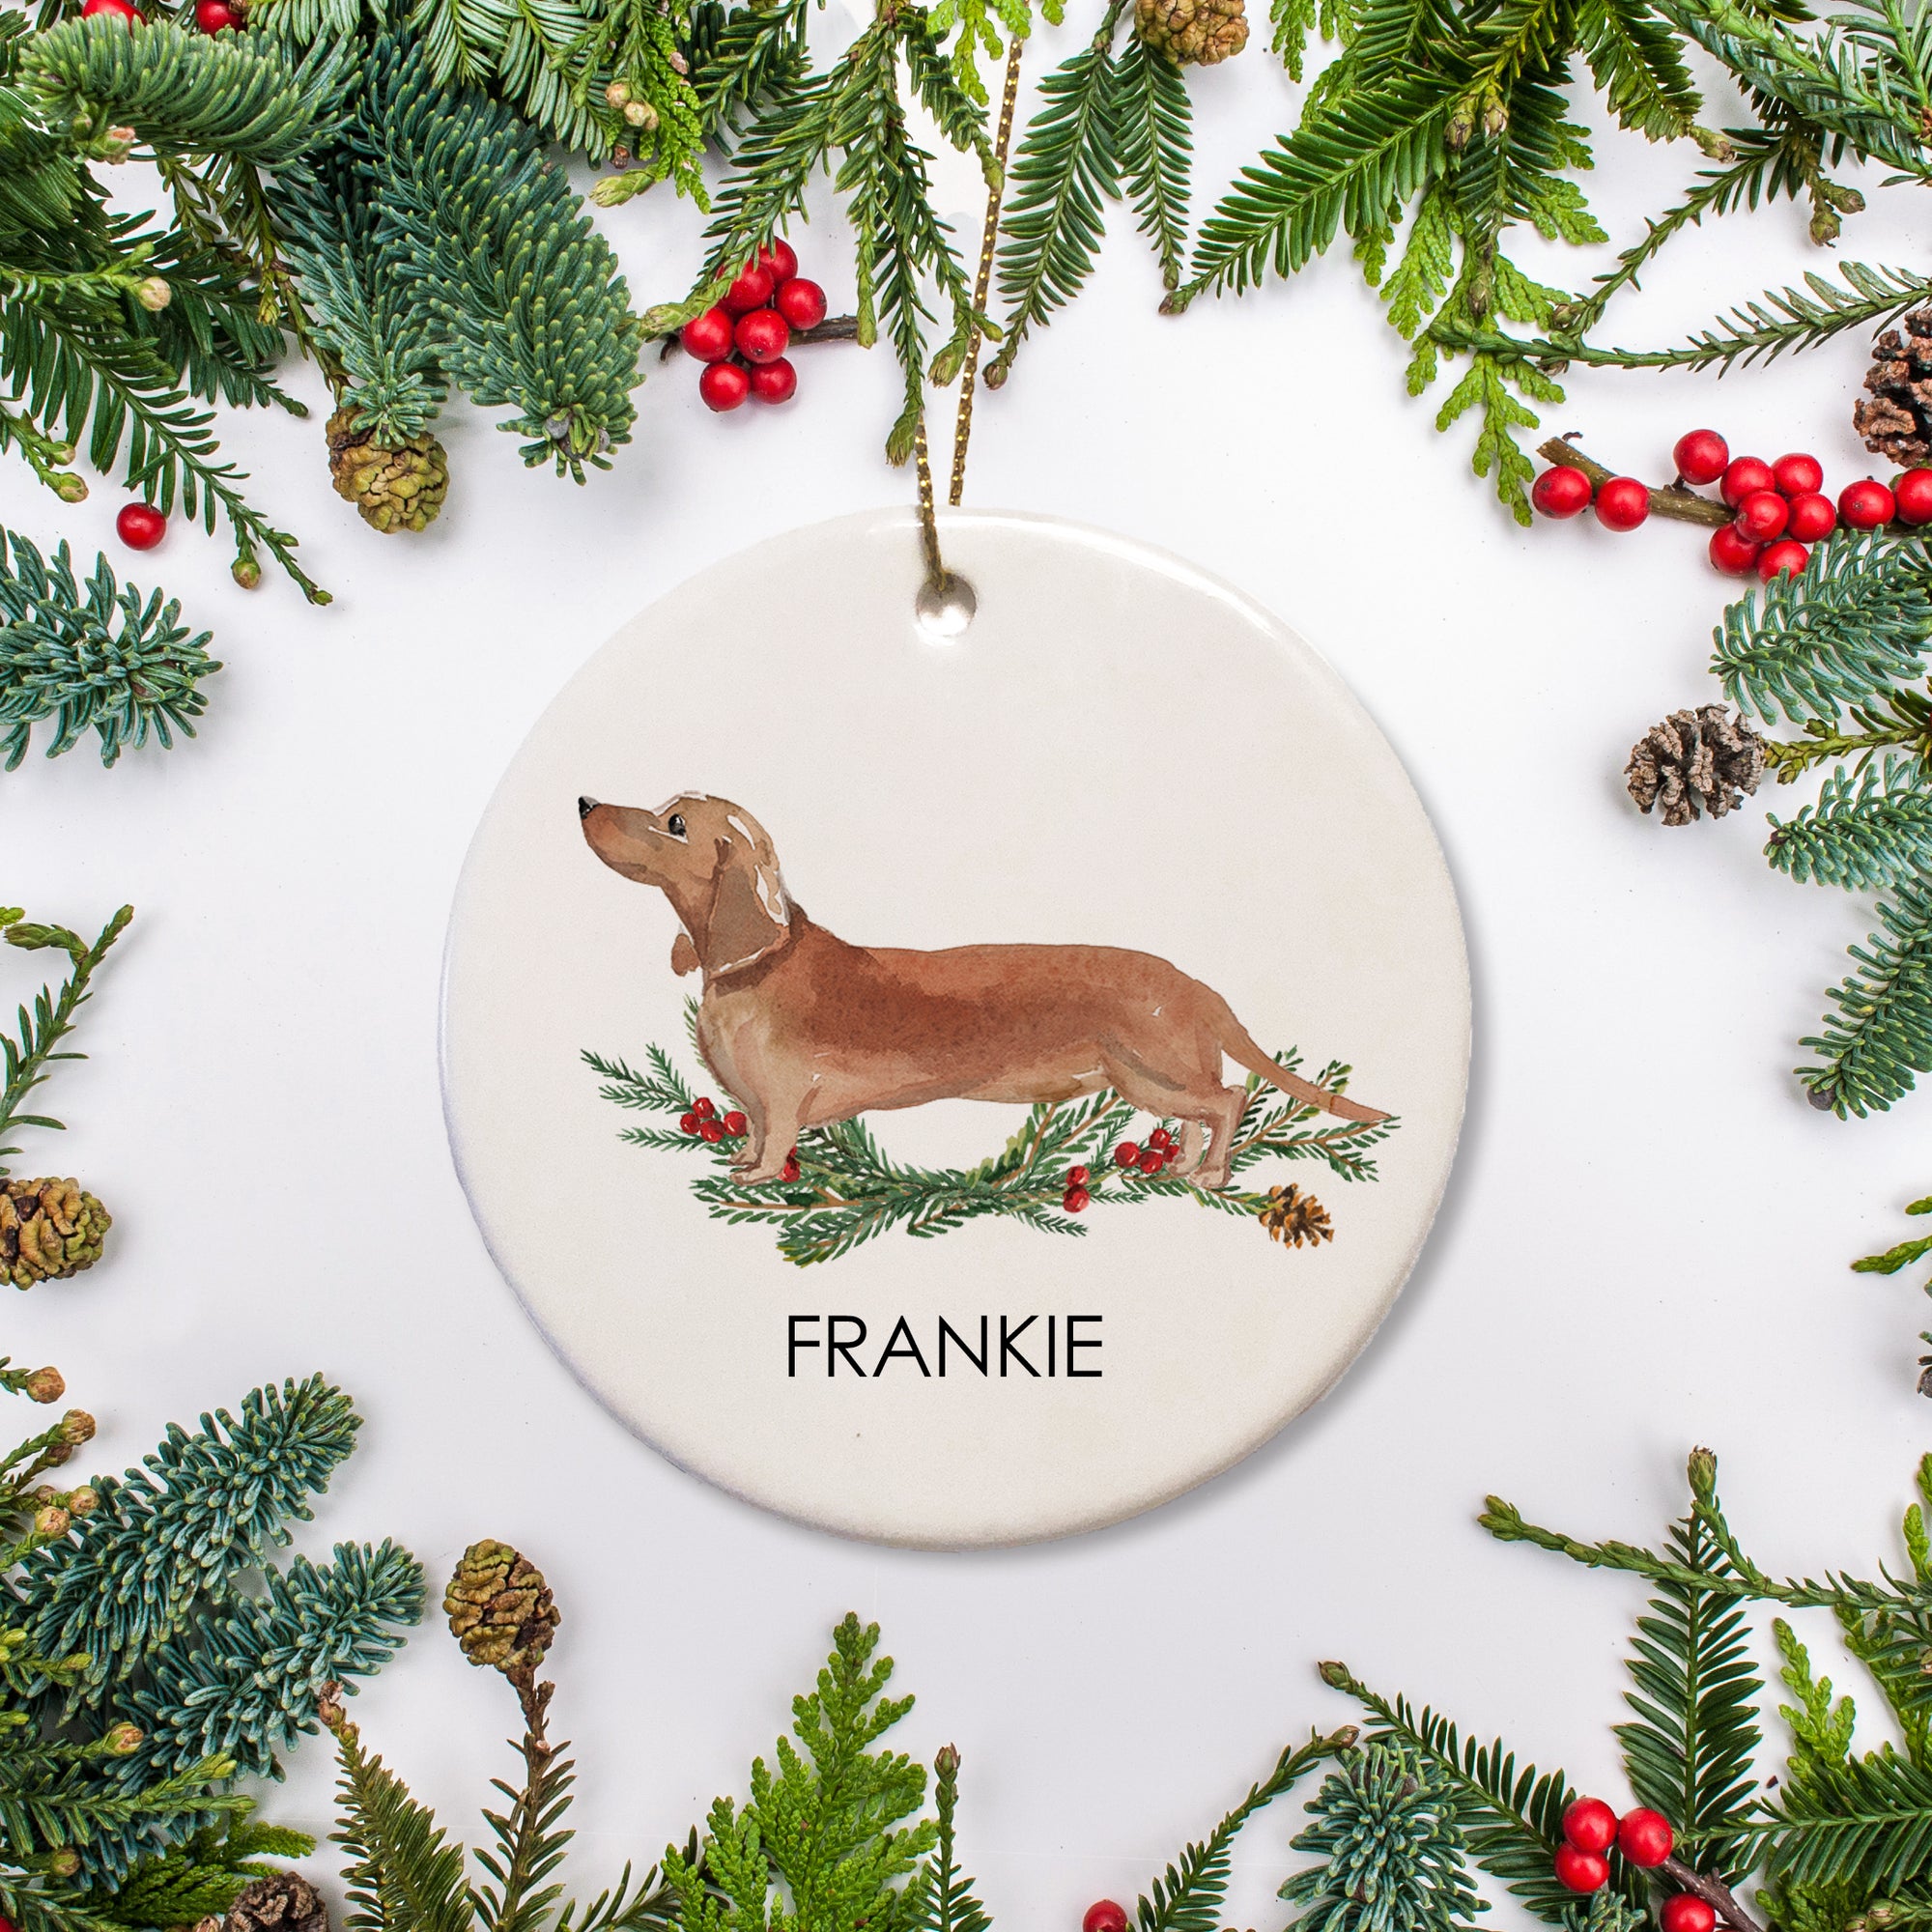 This Dachshund personalized Christmas Ornament features your dog's name. It makes for a thoughtful present for pet owners or a memorable keepsake of your pup's holiday season.